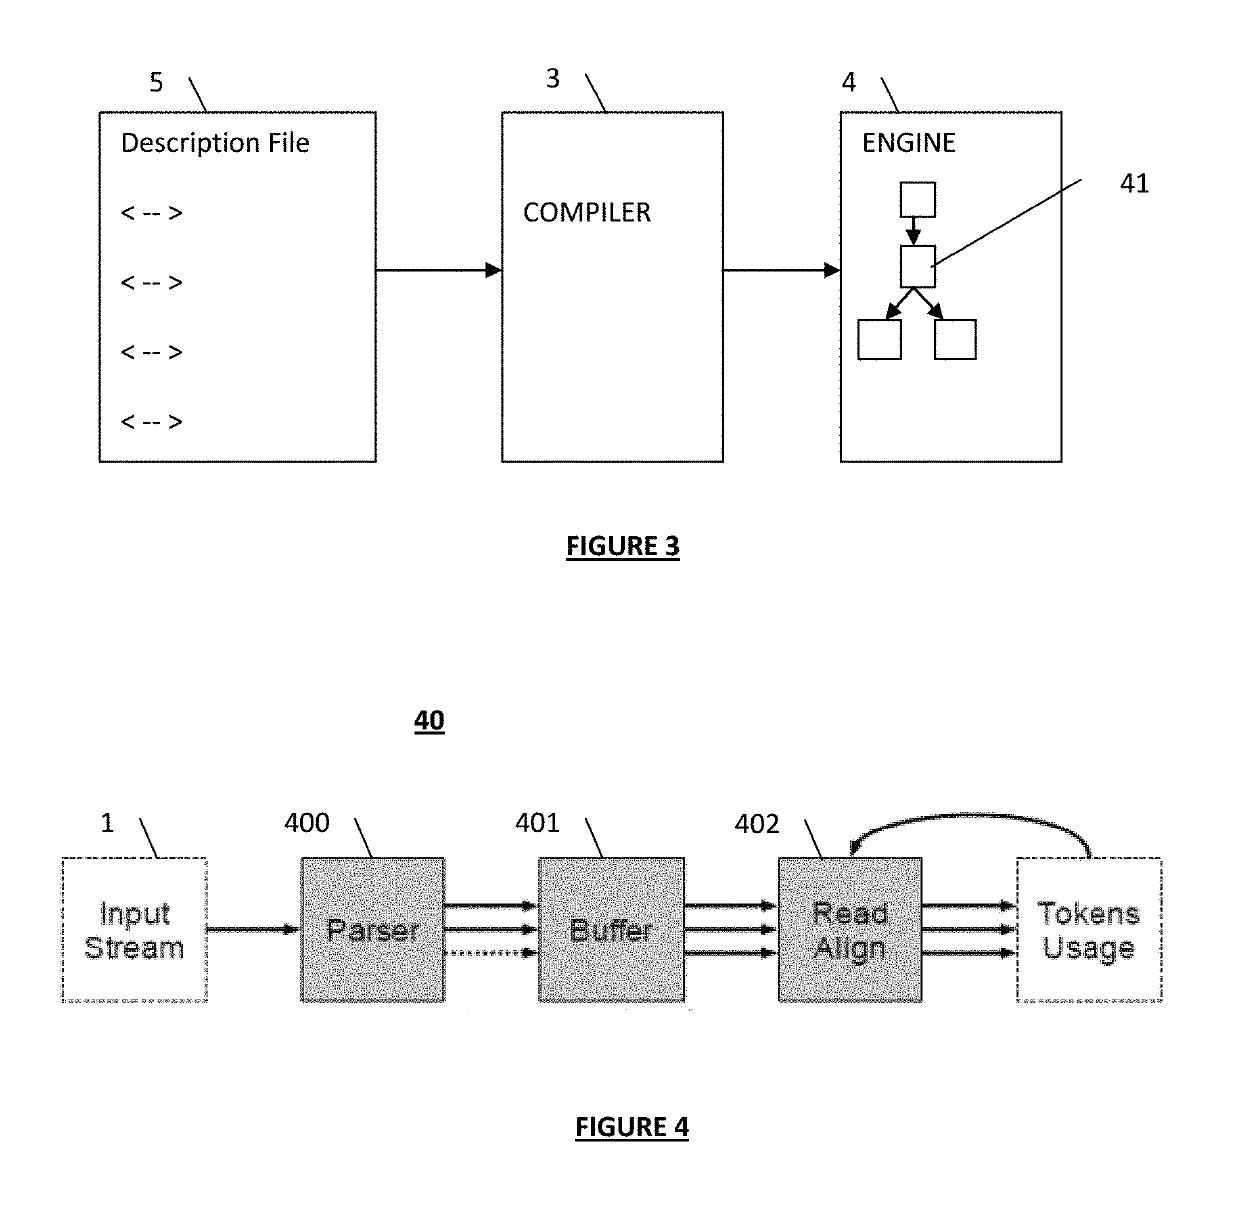 Method and a Device for Decoding Data Streams in Reconfigurable Platforms